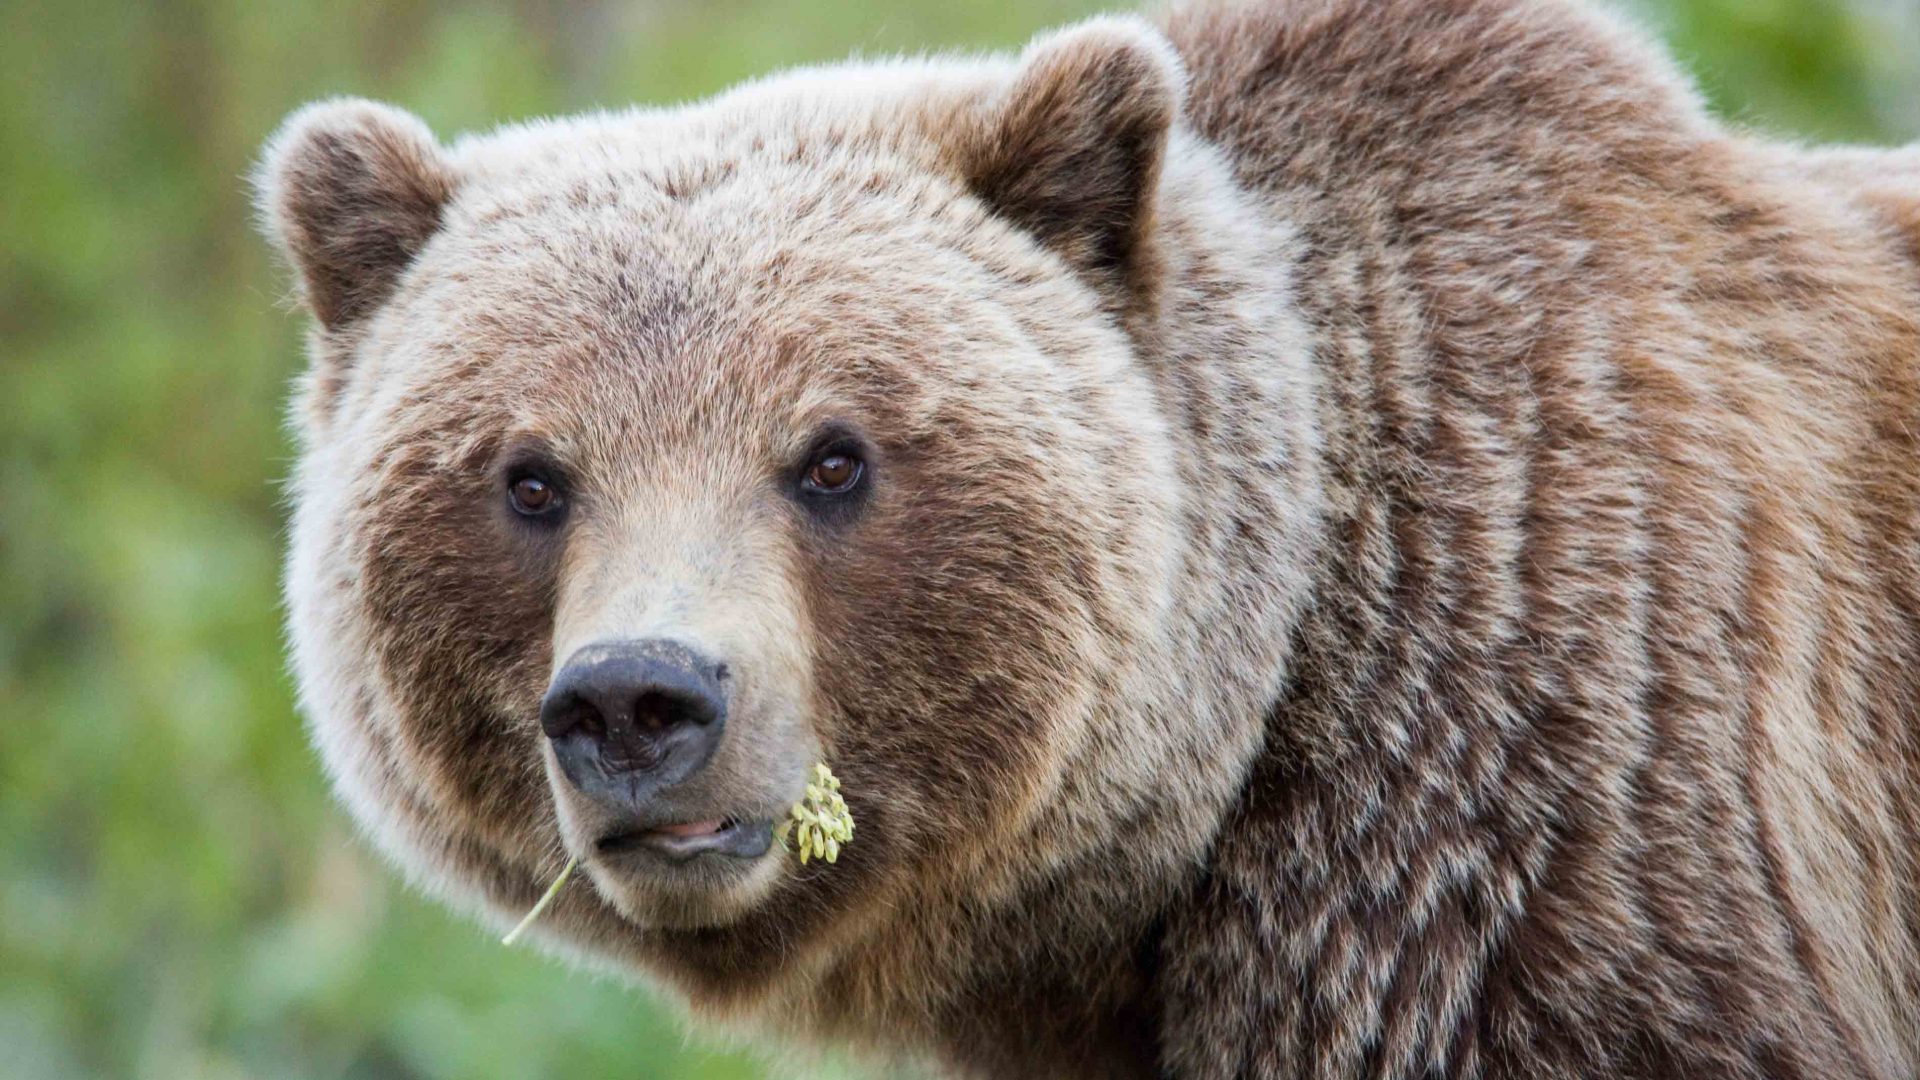 A grizzly bear spotted in the Yukon.